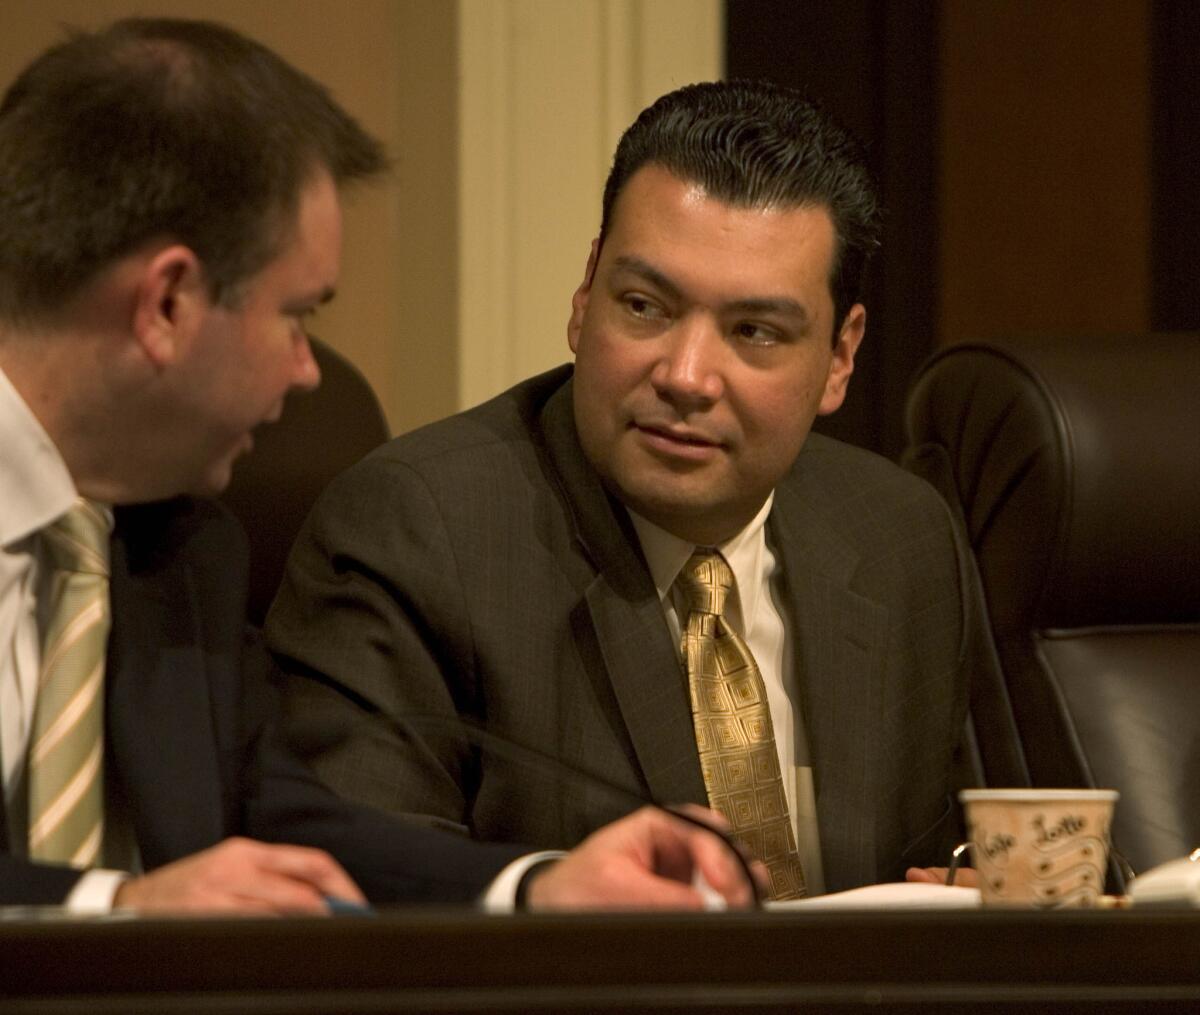 State Senator Alex Padilla (D¿Pacoima), center, listens to a staffer during a Rules Committee hearing in the state Capitol.